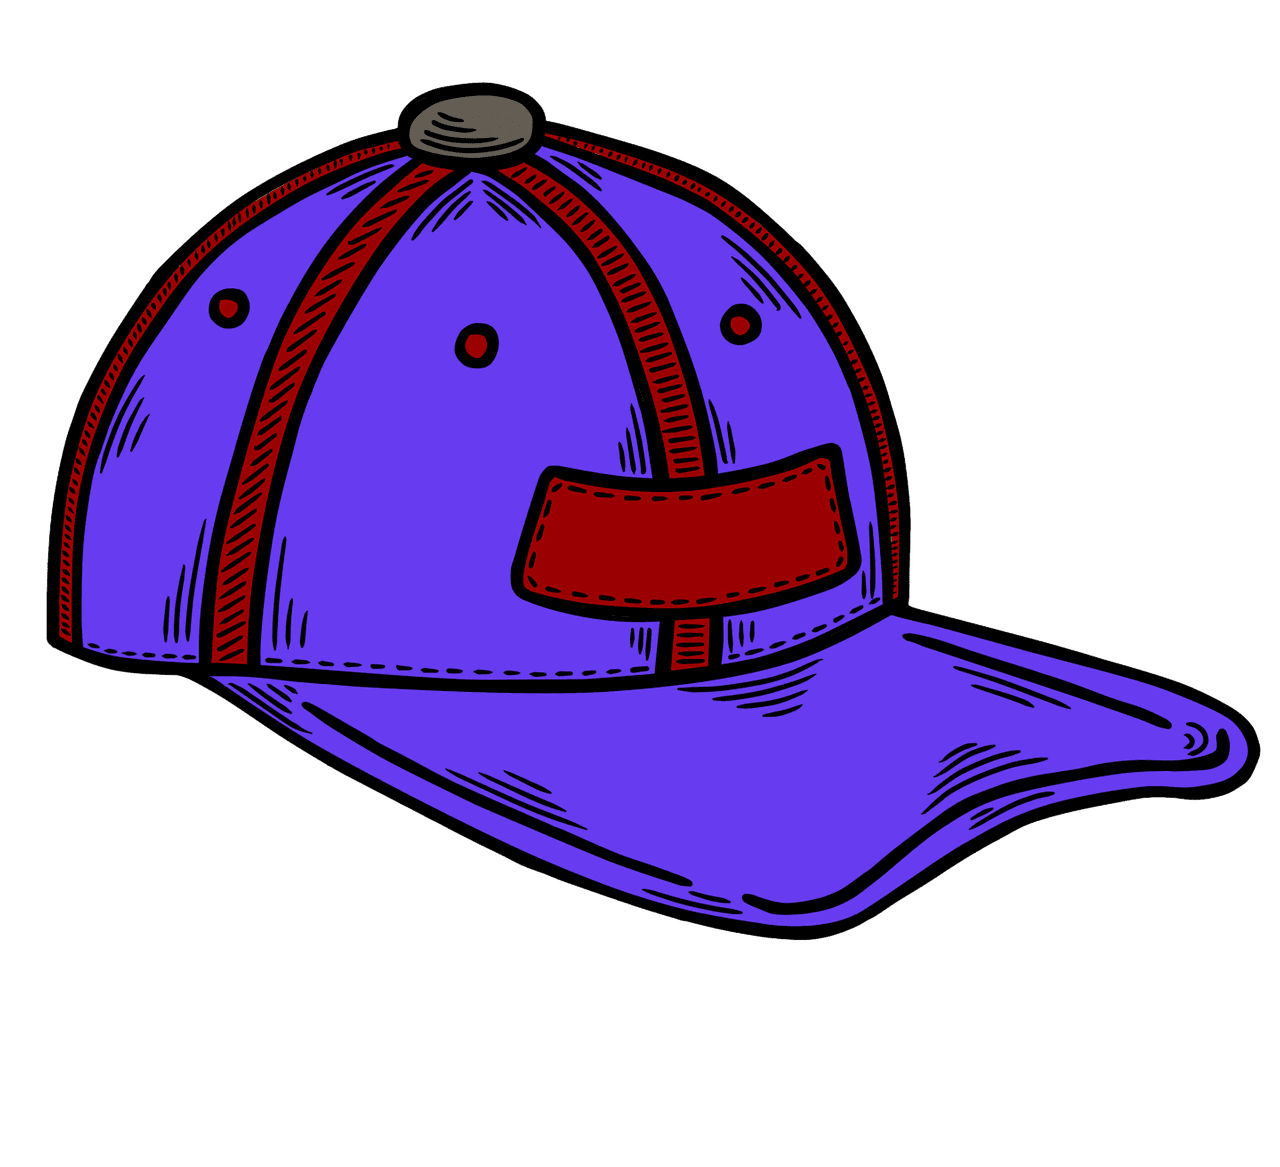 Monday 25th July 10am – 12pm Design and paint a cool baseball cap Want to keep cool this summer and be cool at the same time? Come design and paint your own baseball cap. Make a design that is unique to your own interests -be your own fan and make a cool colour statement fashion piece